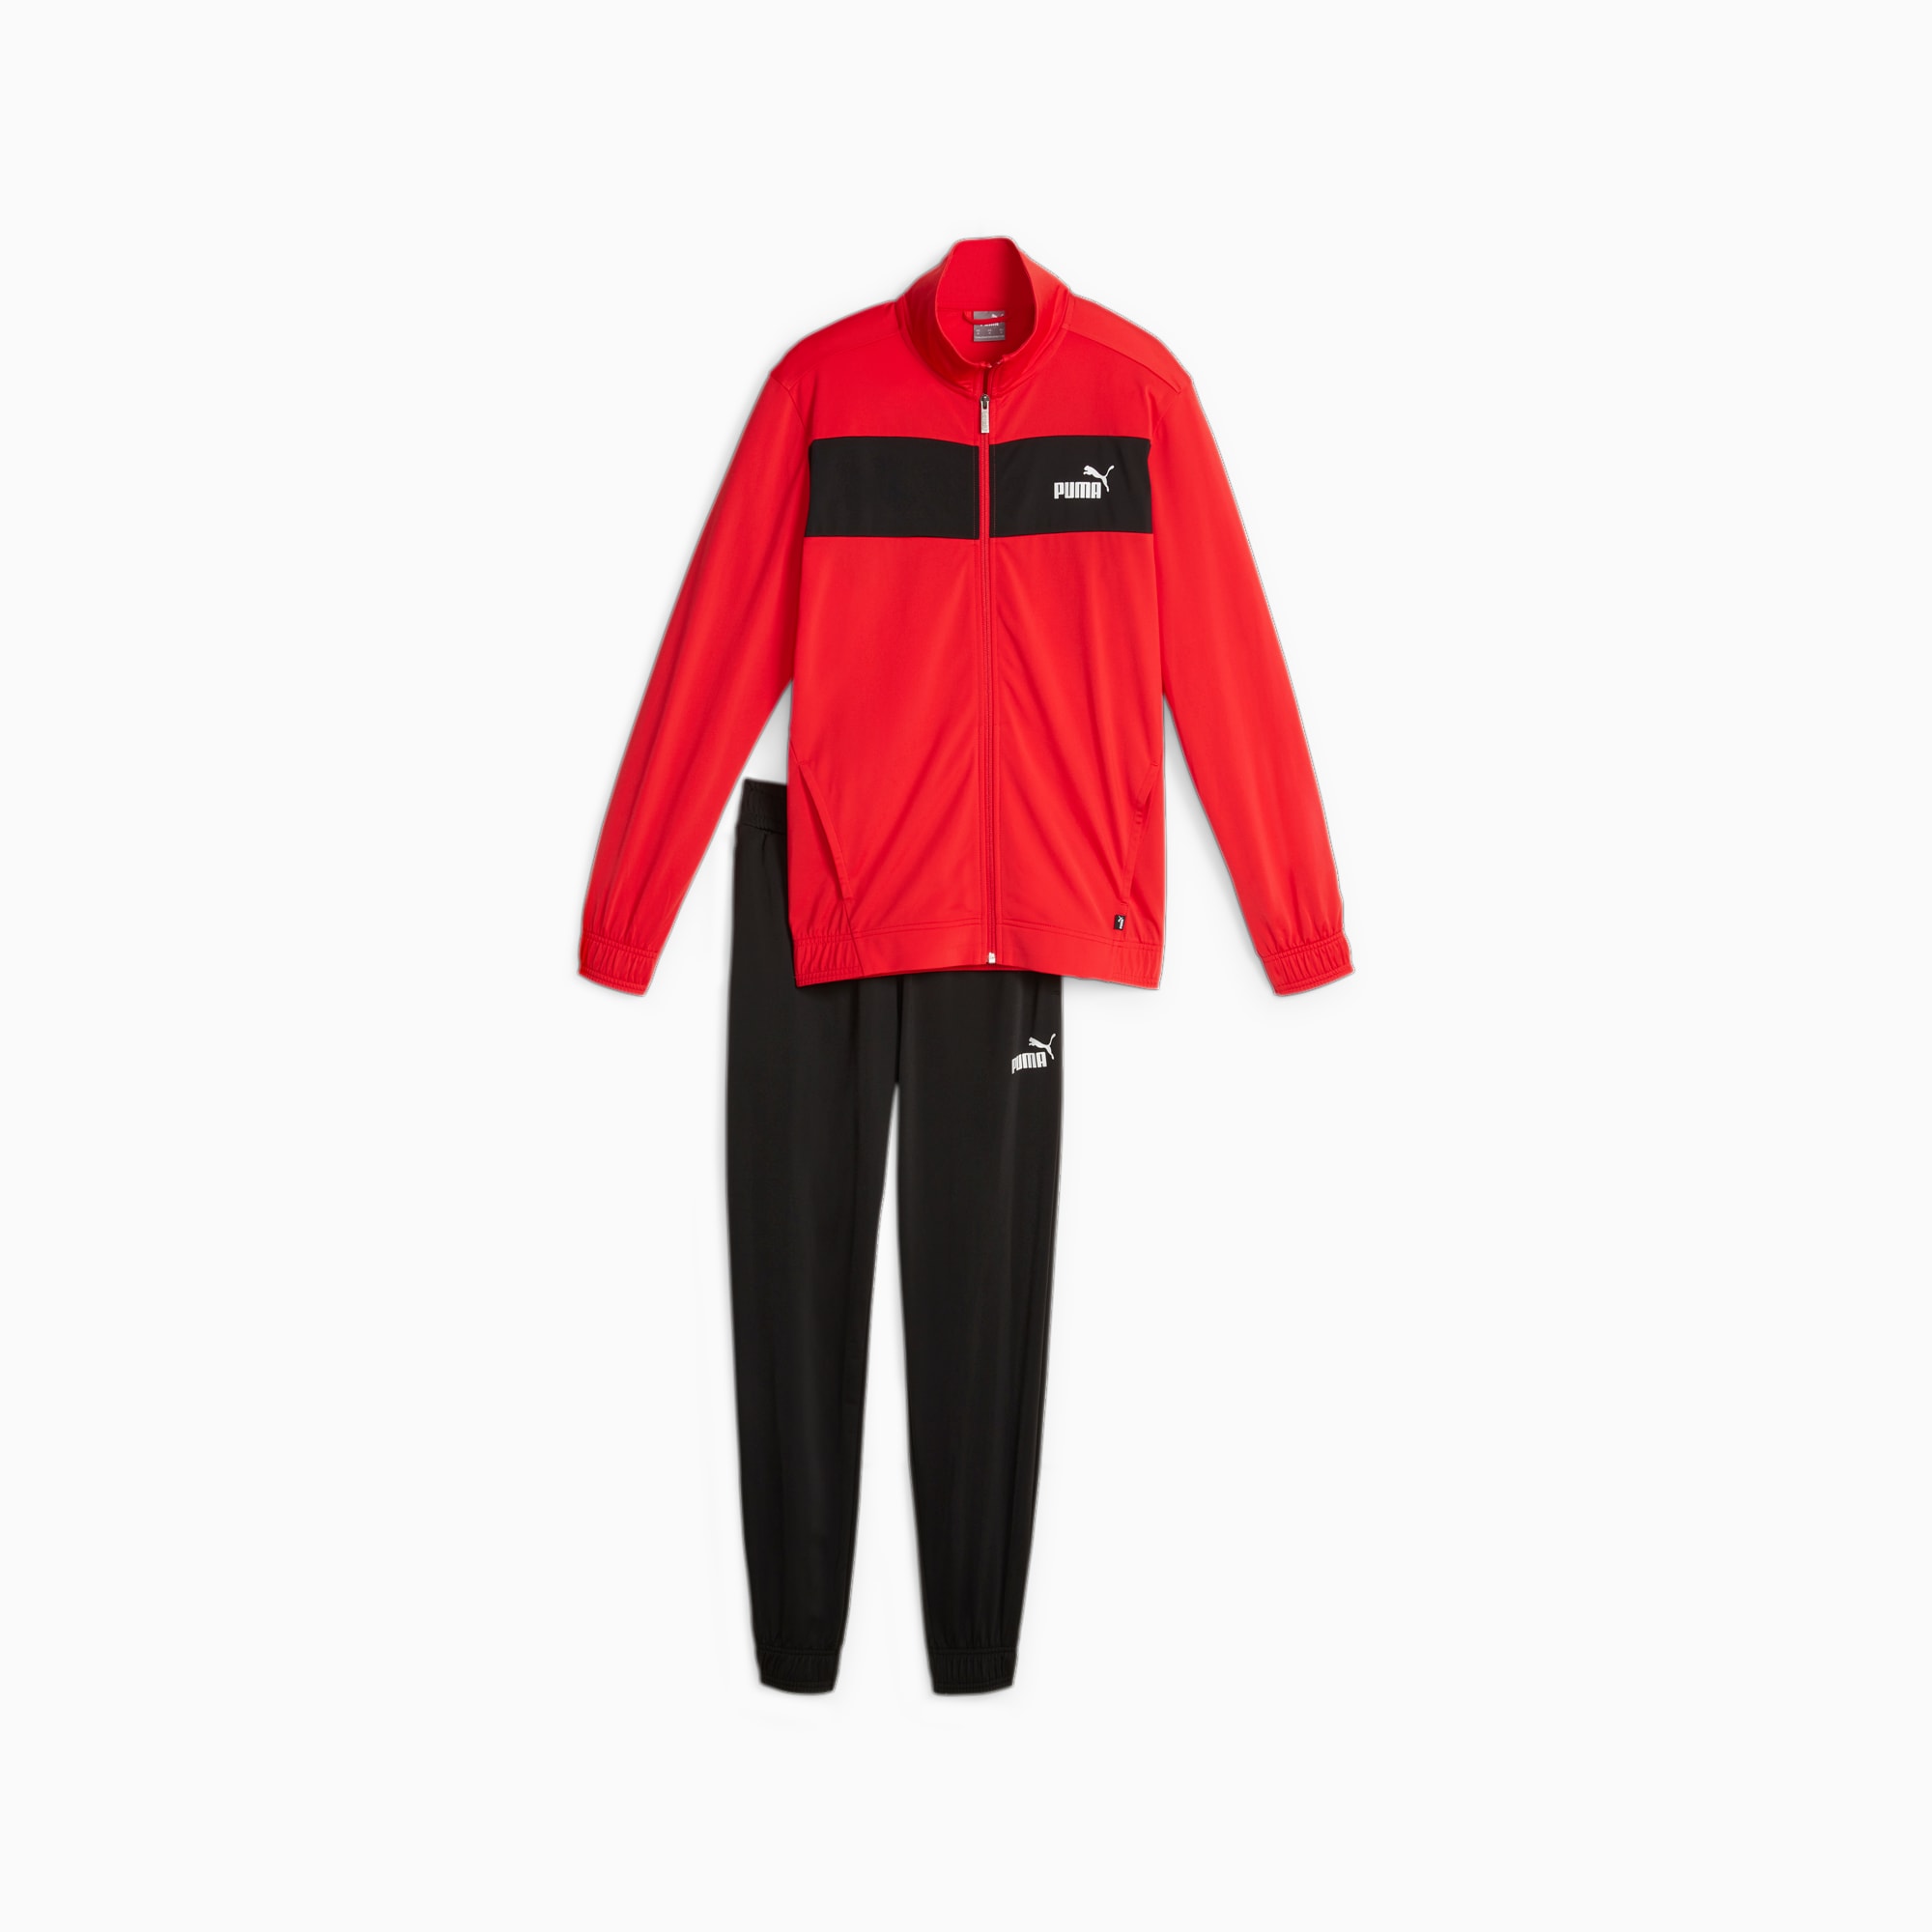 PUMA Men's Poly Tracksuit, For All Time Red, Size S, Clothing